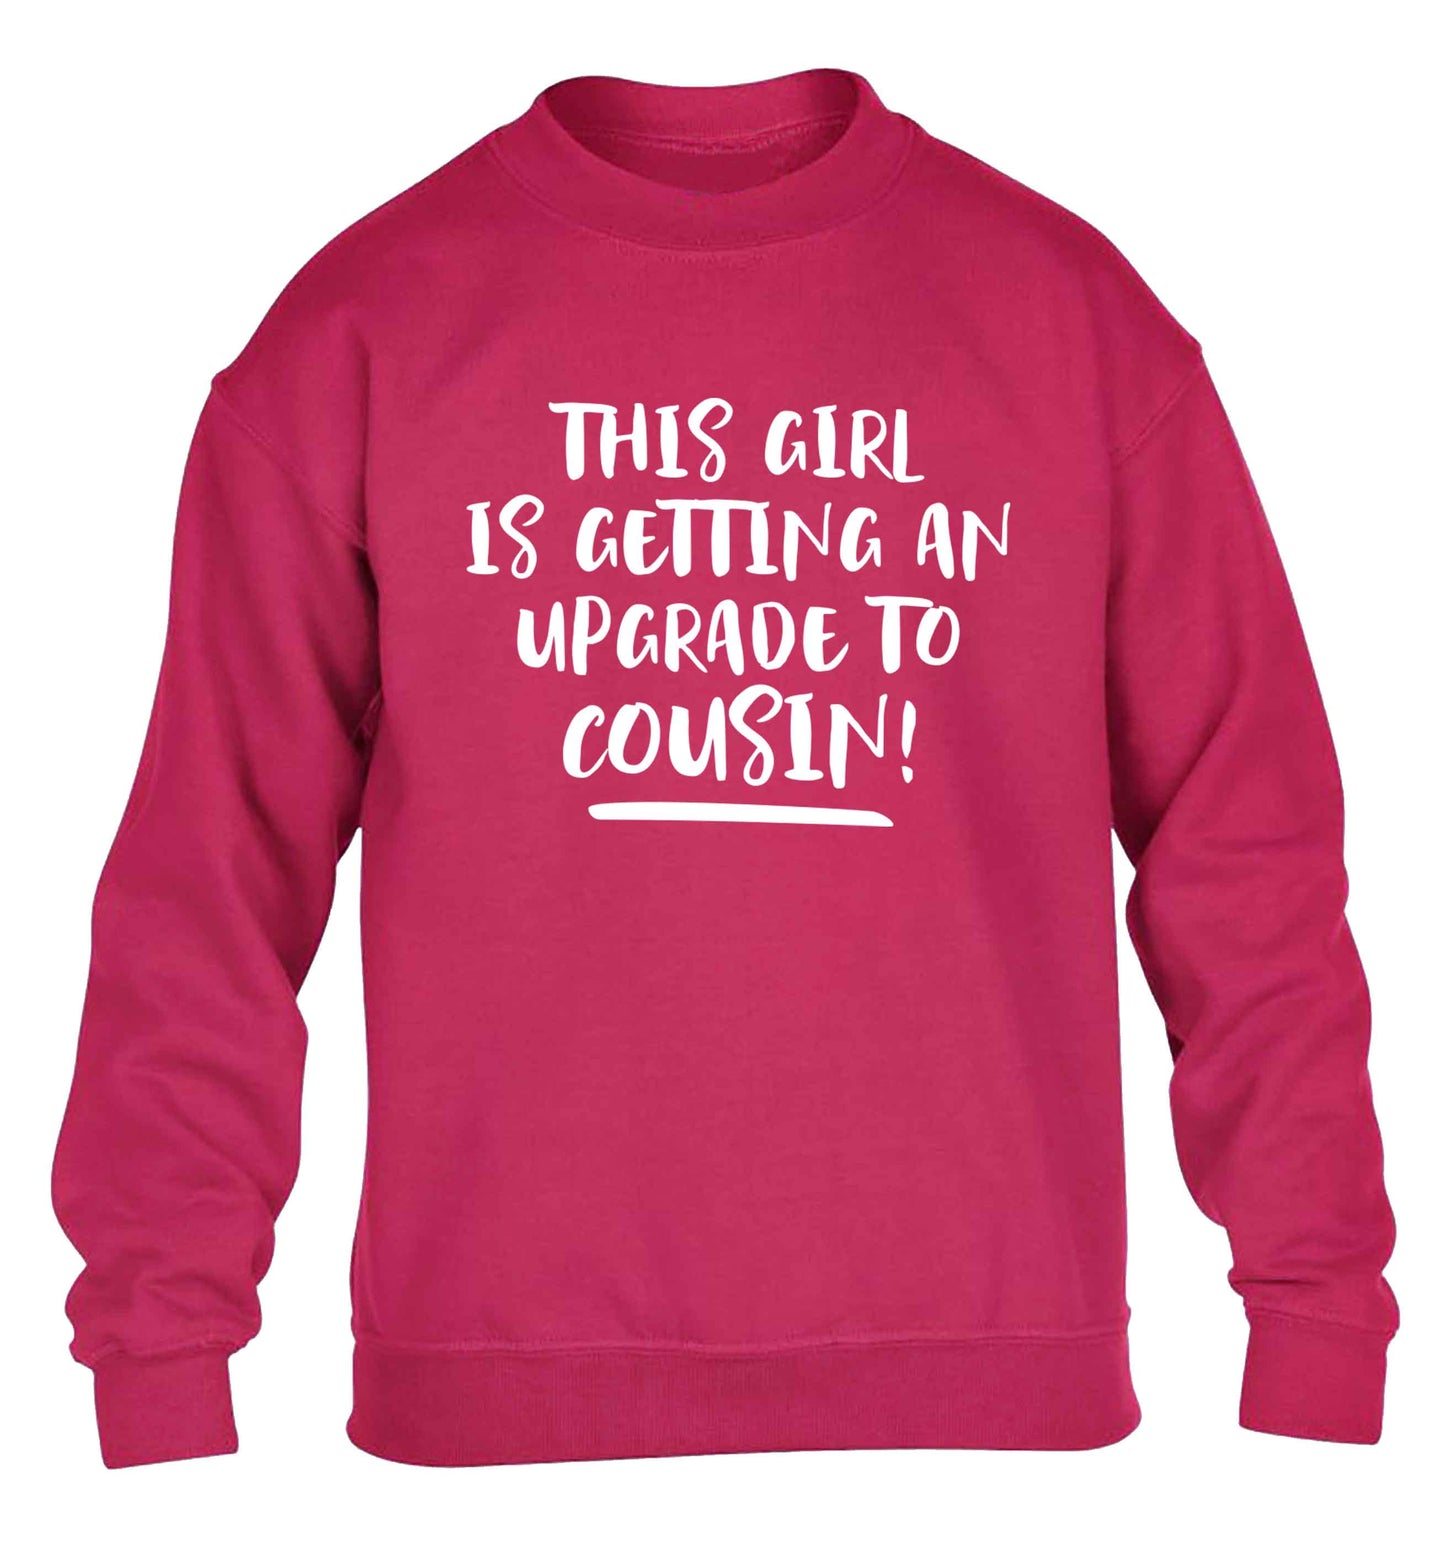 This girl is getting an upgrade to cousin! children's pink sweater 12-13 Years